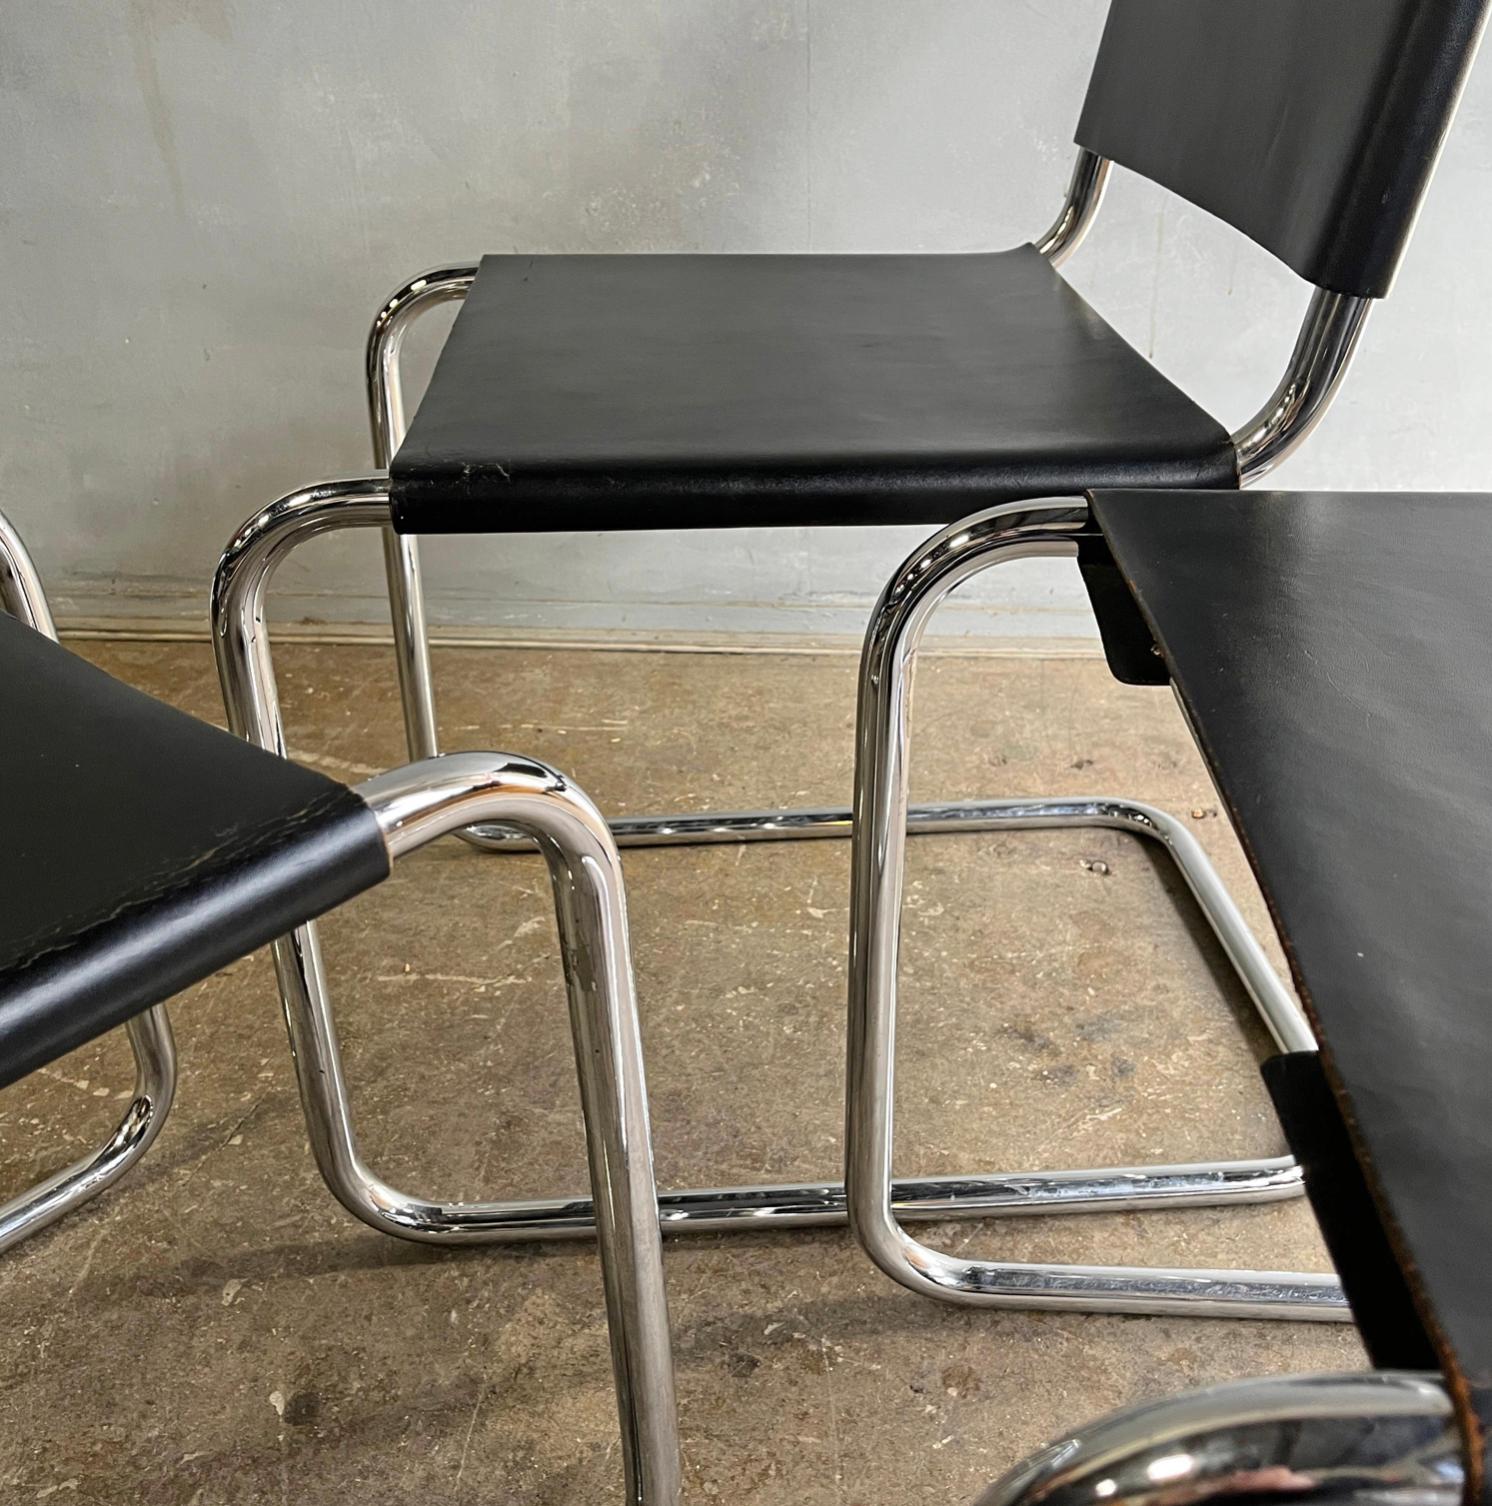 Knoll Spoleto chairs. Marcel Breuer designed the B33 chair in 1927, it is based on the cantilever principle (cantilevered), in the same spirit as the famous B3 chair or “Wassily chair” that he designed in 1925.

Purchased from Knoll in 1974. Black